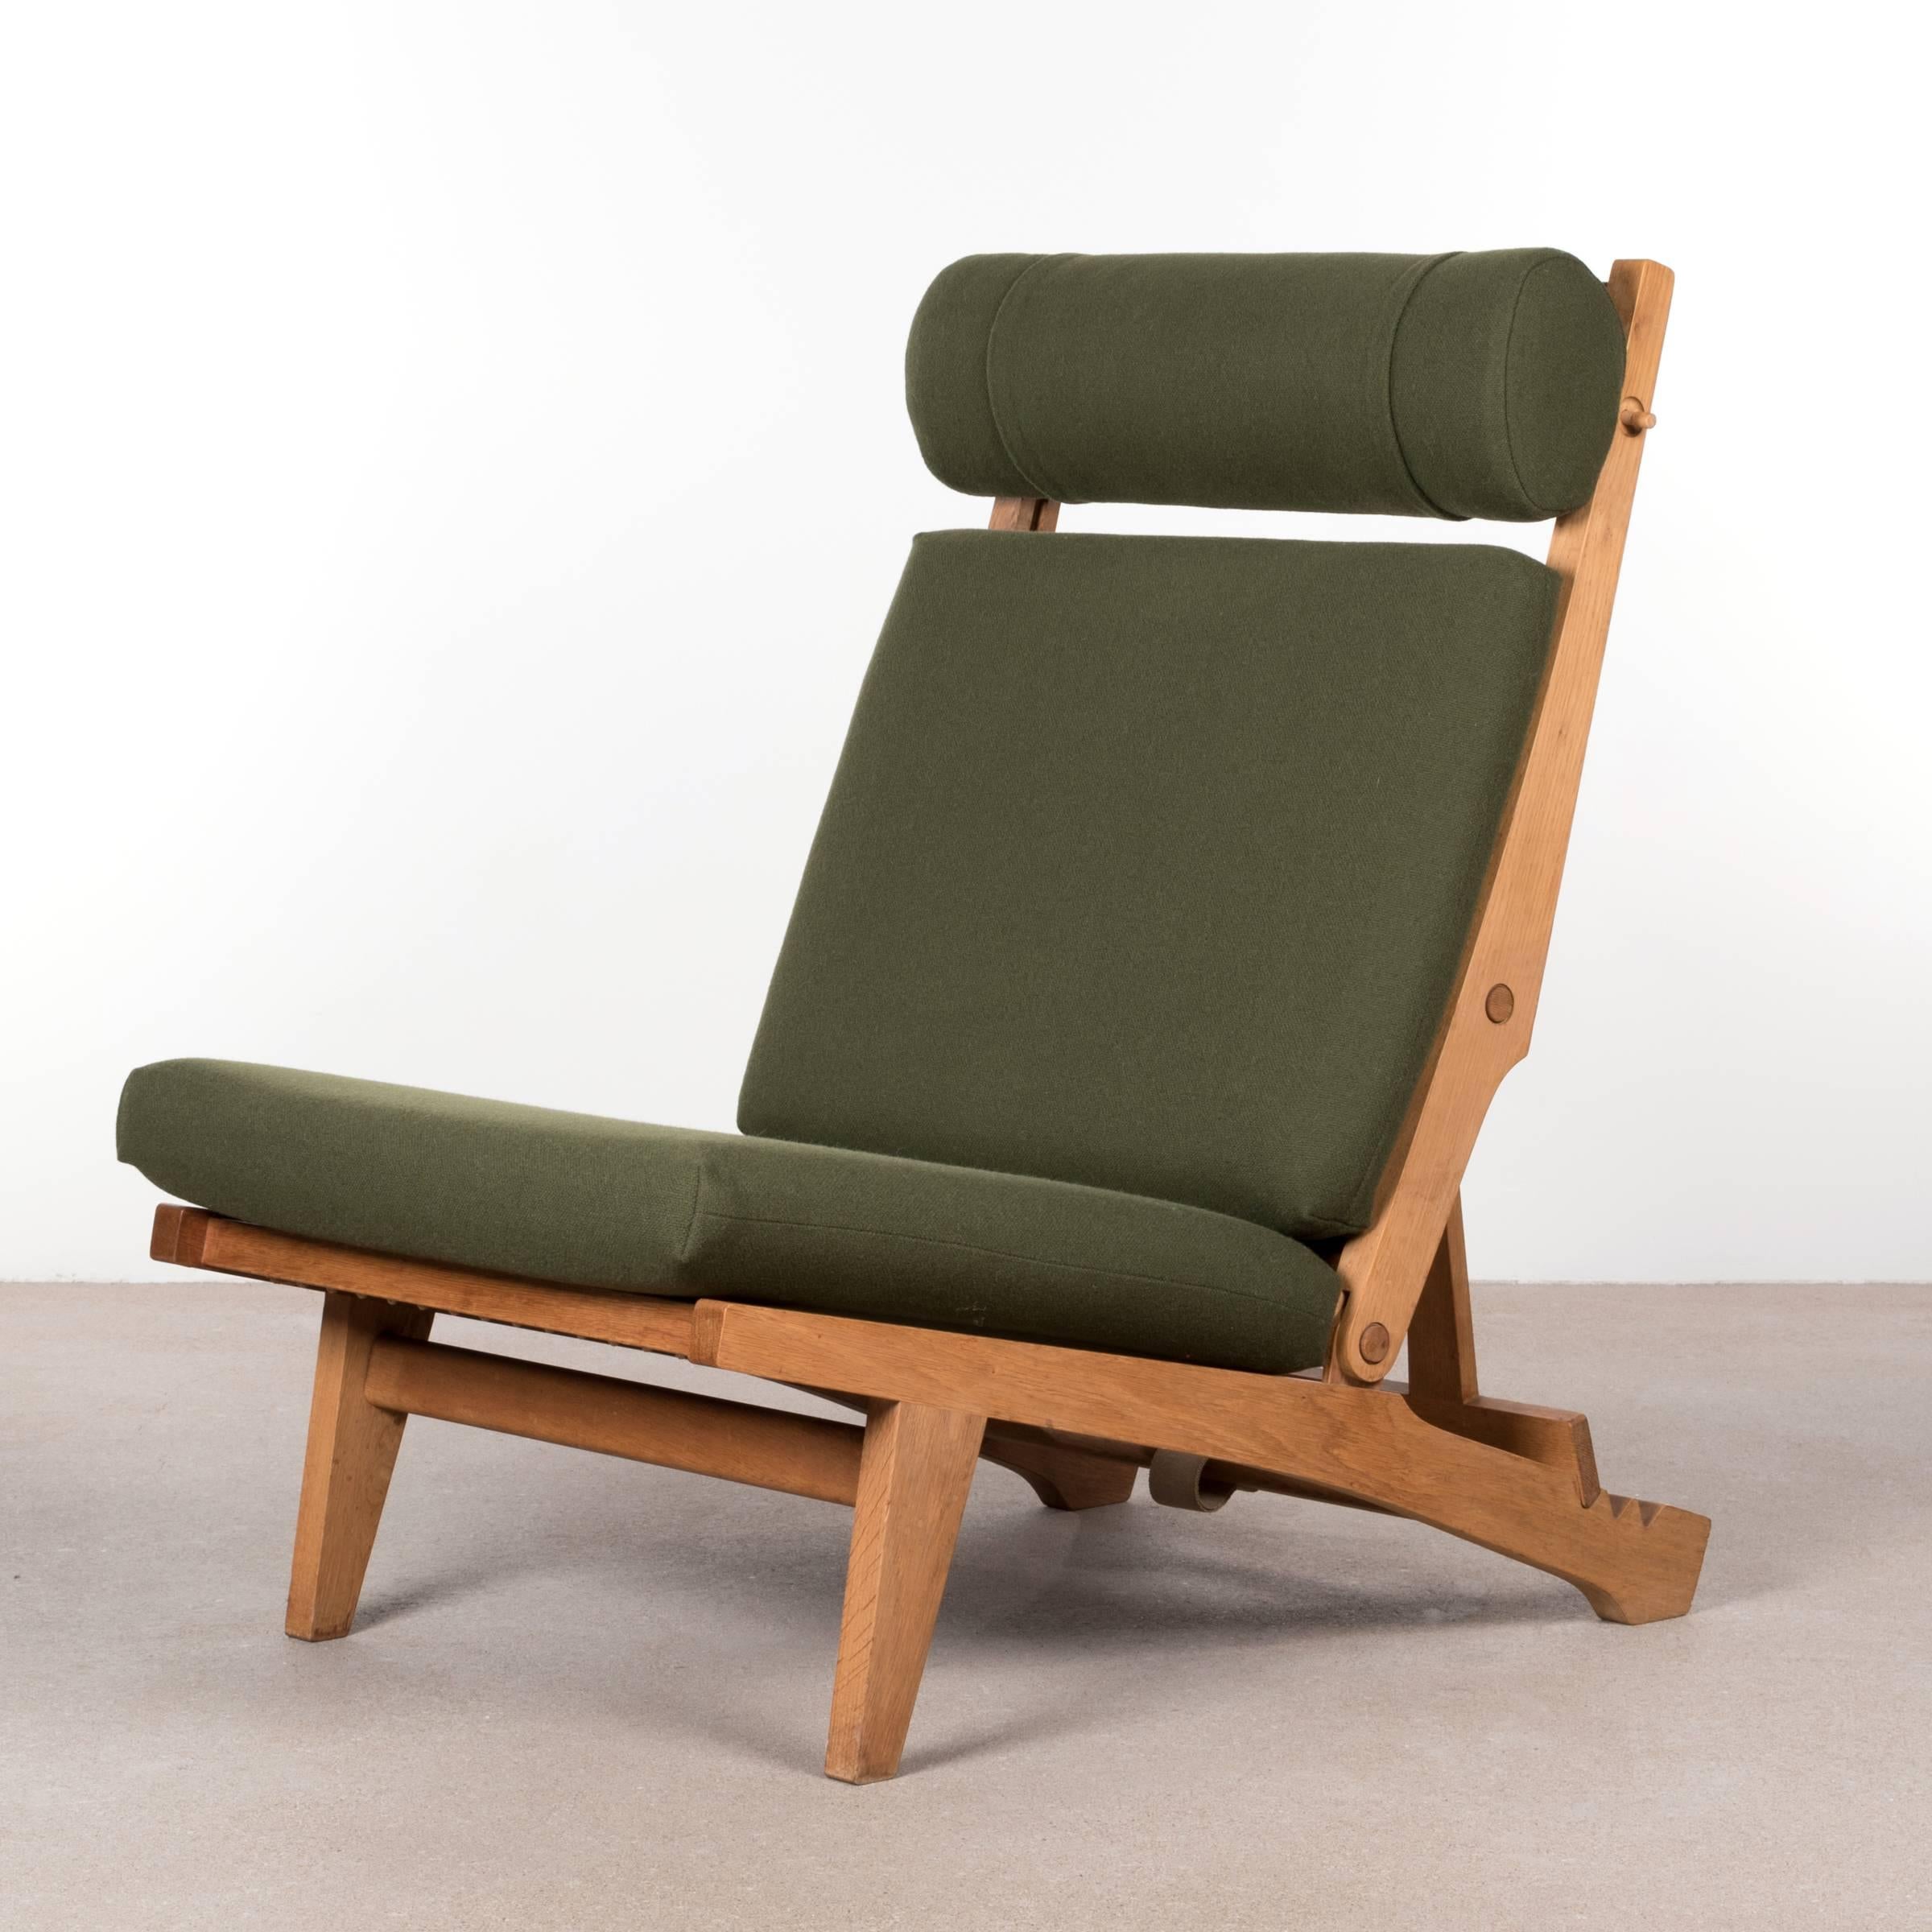 Rare Wegner AP71 folding lounge chair designed in 1968. Adjustable back- and headrest in three positions. Solid oak frame, papercord seating and new dark green cushions (Kvadrat Tonus) all in very good / excellent condition. Available with matching